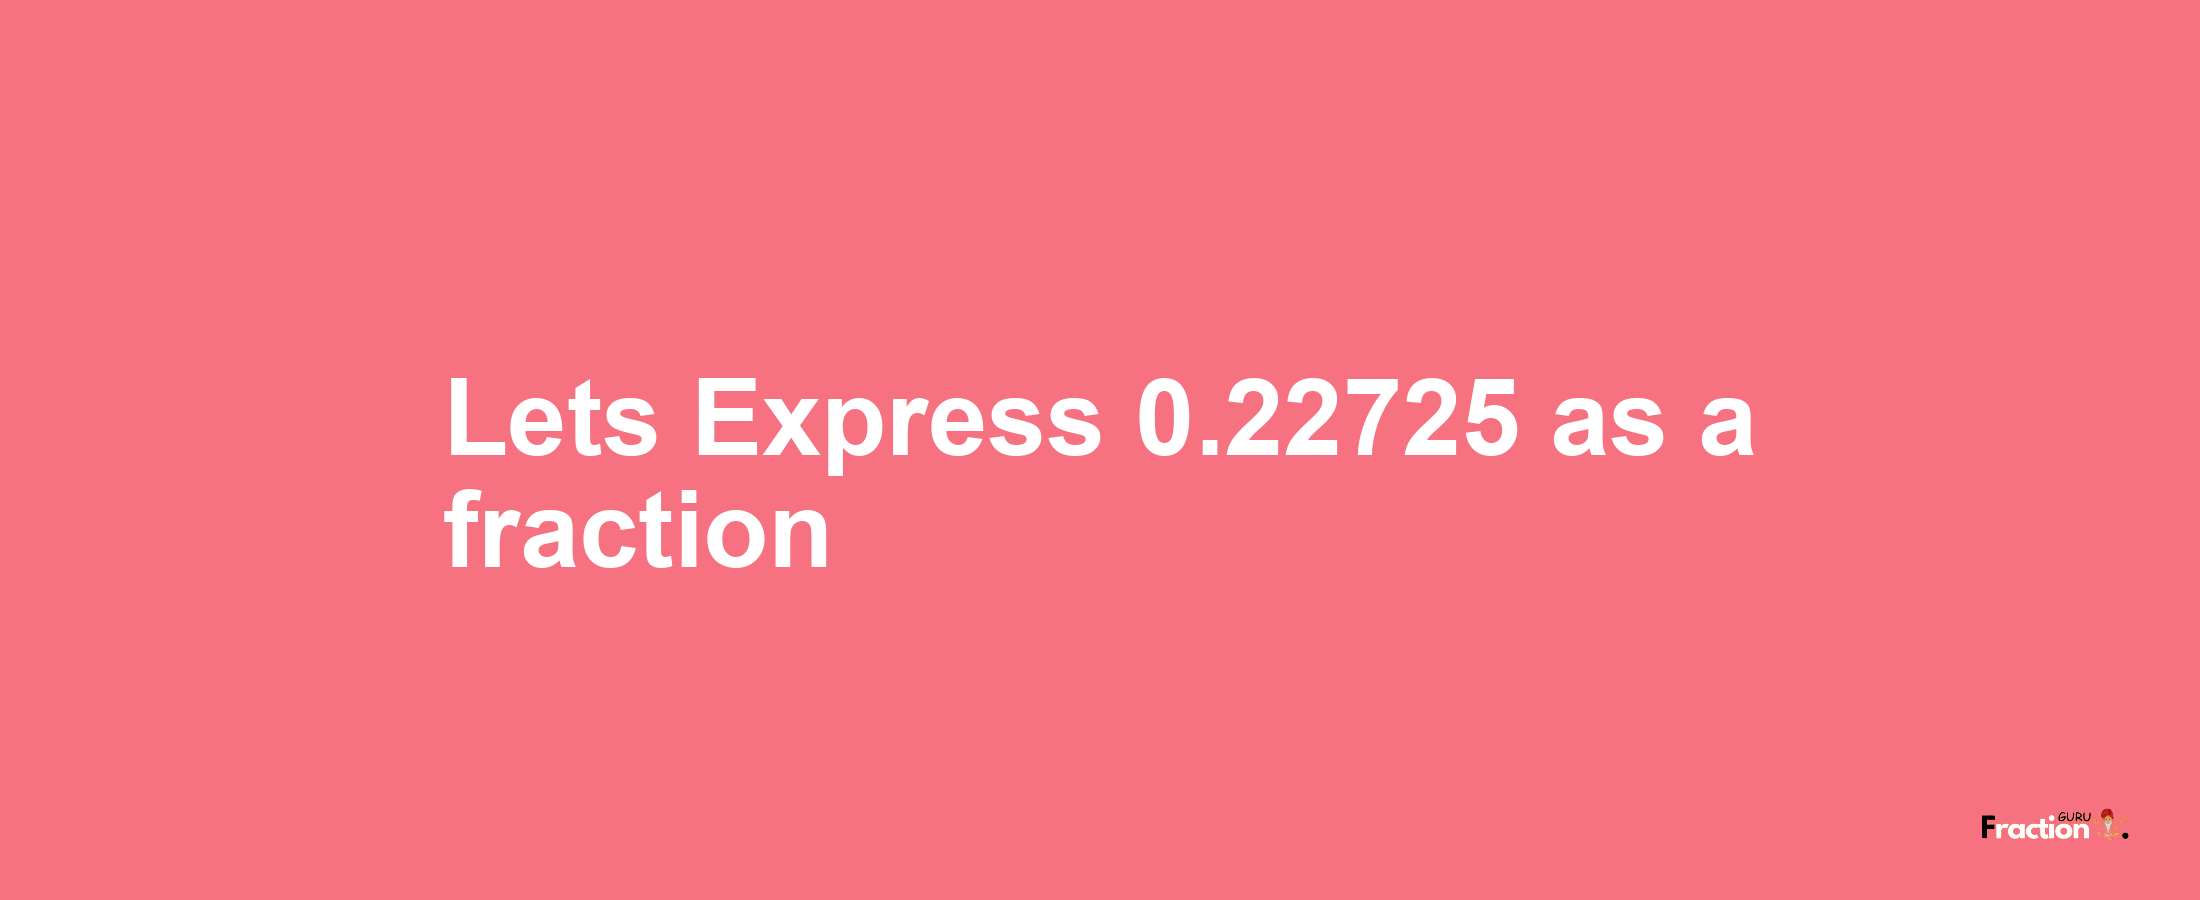 Lets Express 0.22725 as afraction